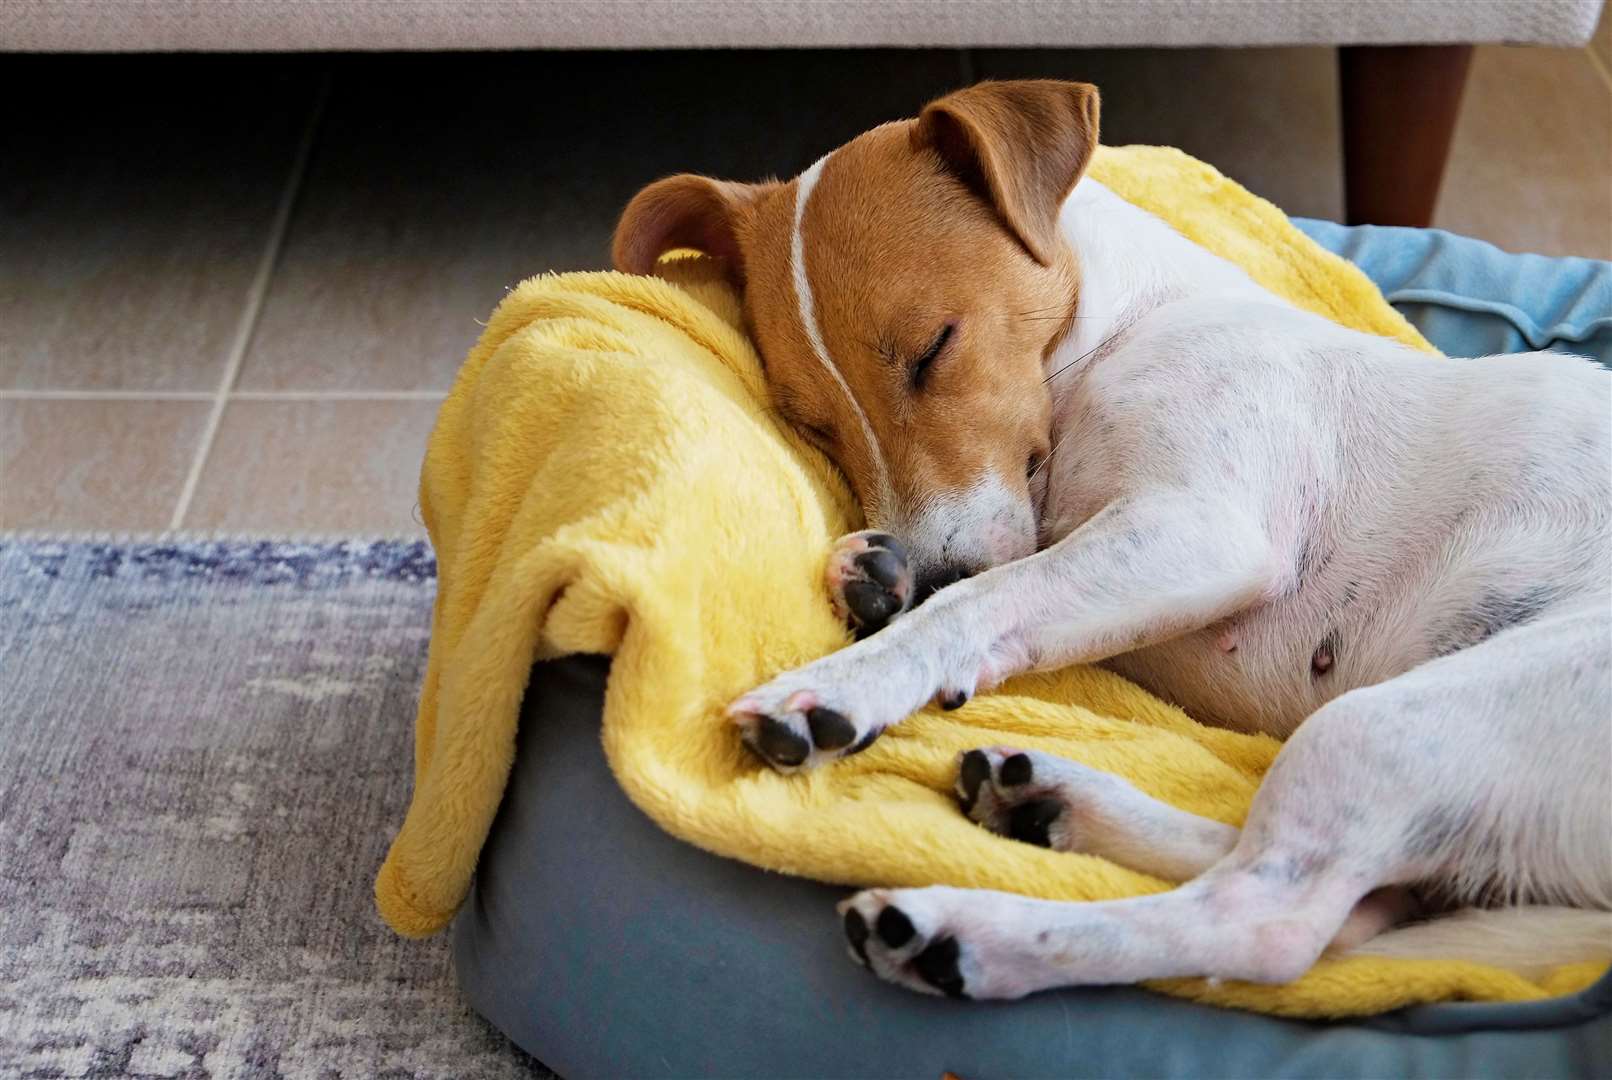 Advice includes making more than one visit before taking the puppy home. Image: iStock.